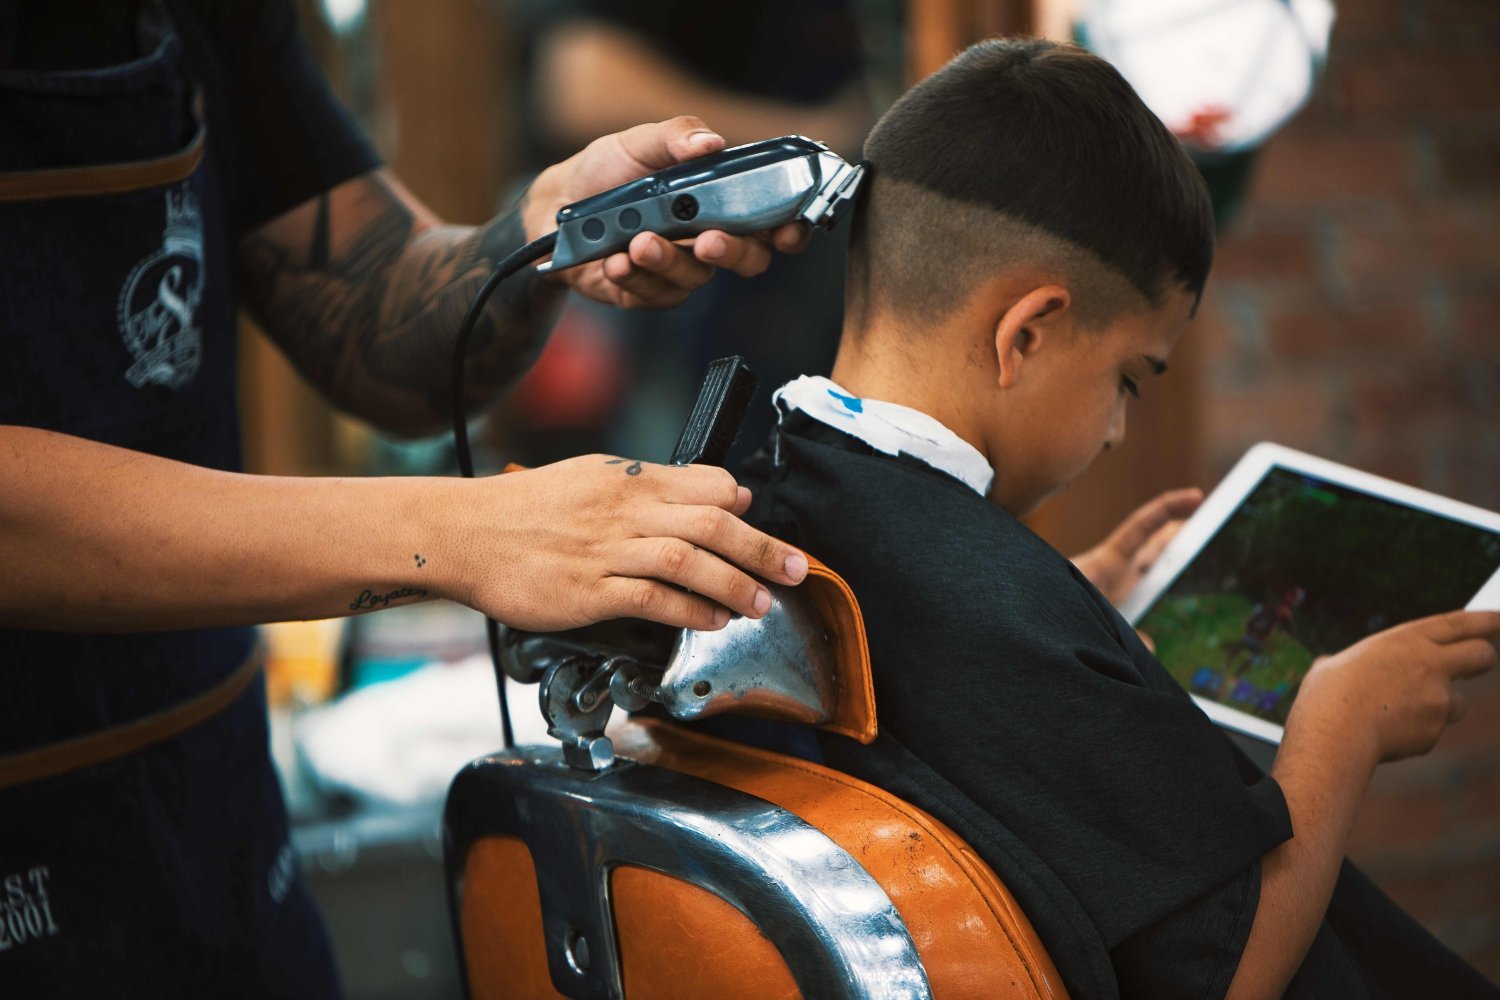 Discover the Best Barbershop in Miami, Florida